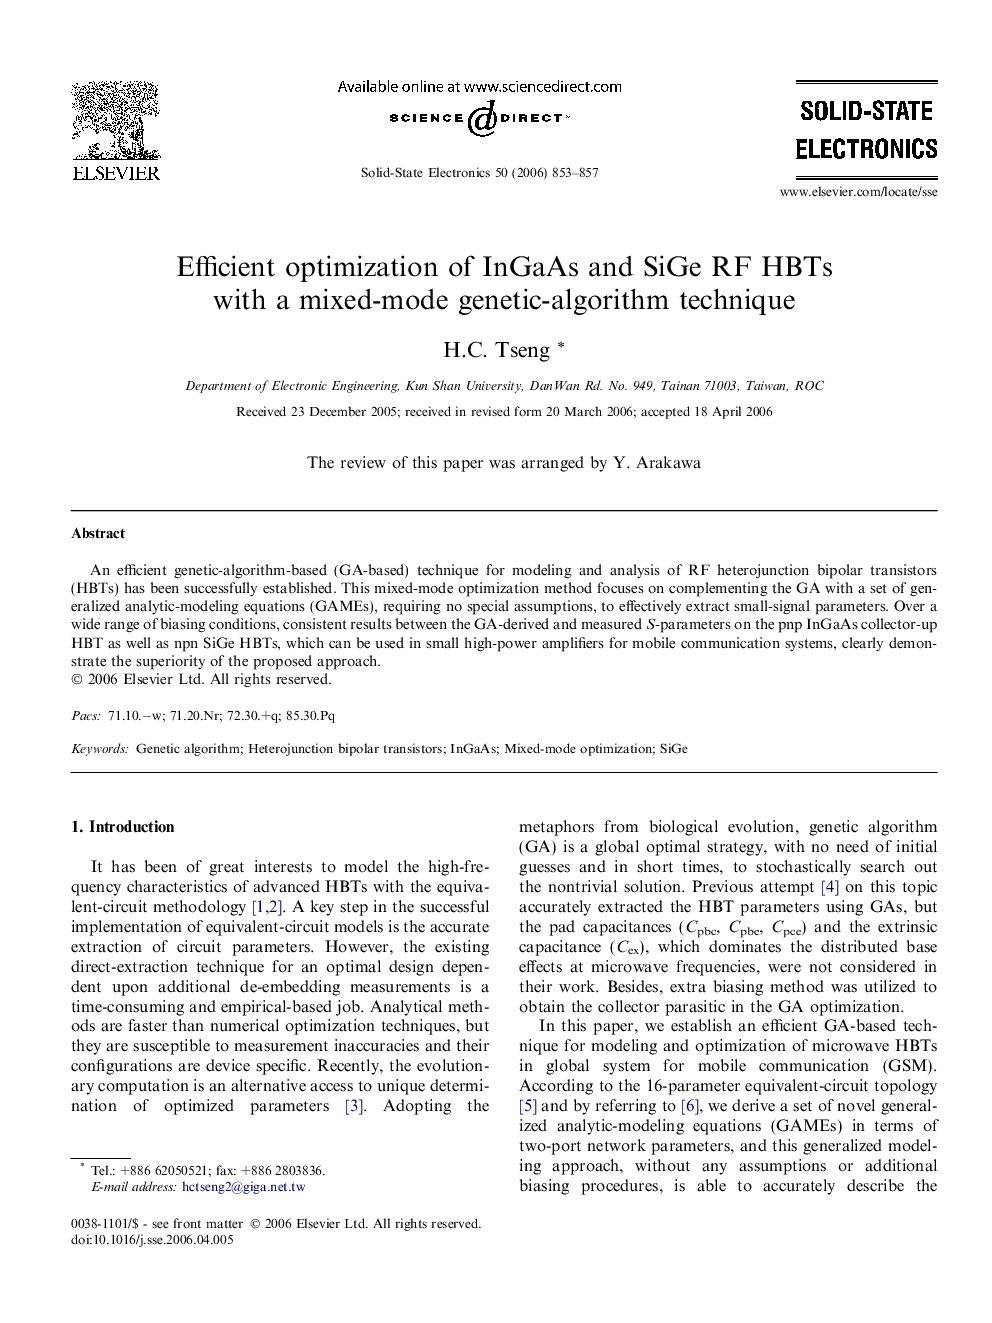 Efficient optimization of InGaAs and SiGe RF HBTs with a mixed-mode genetic-algorithm technique